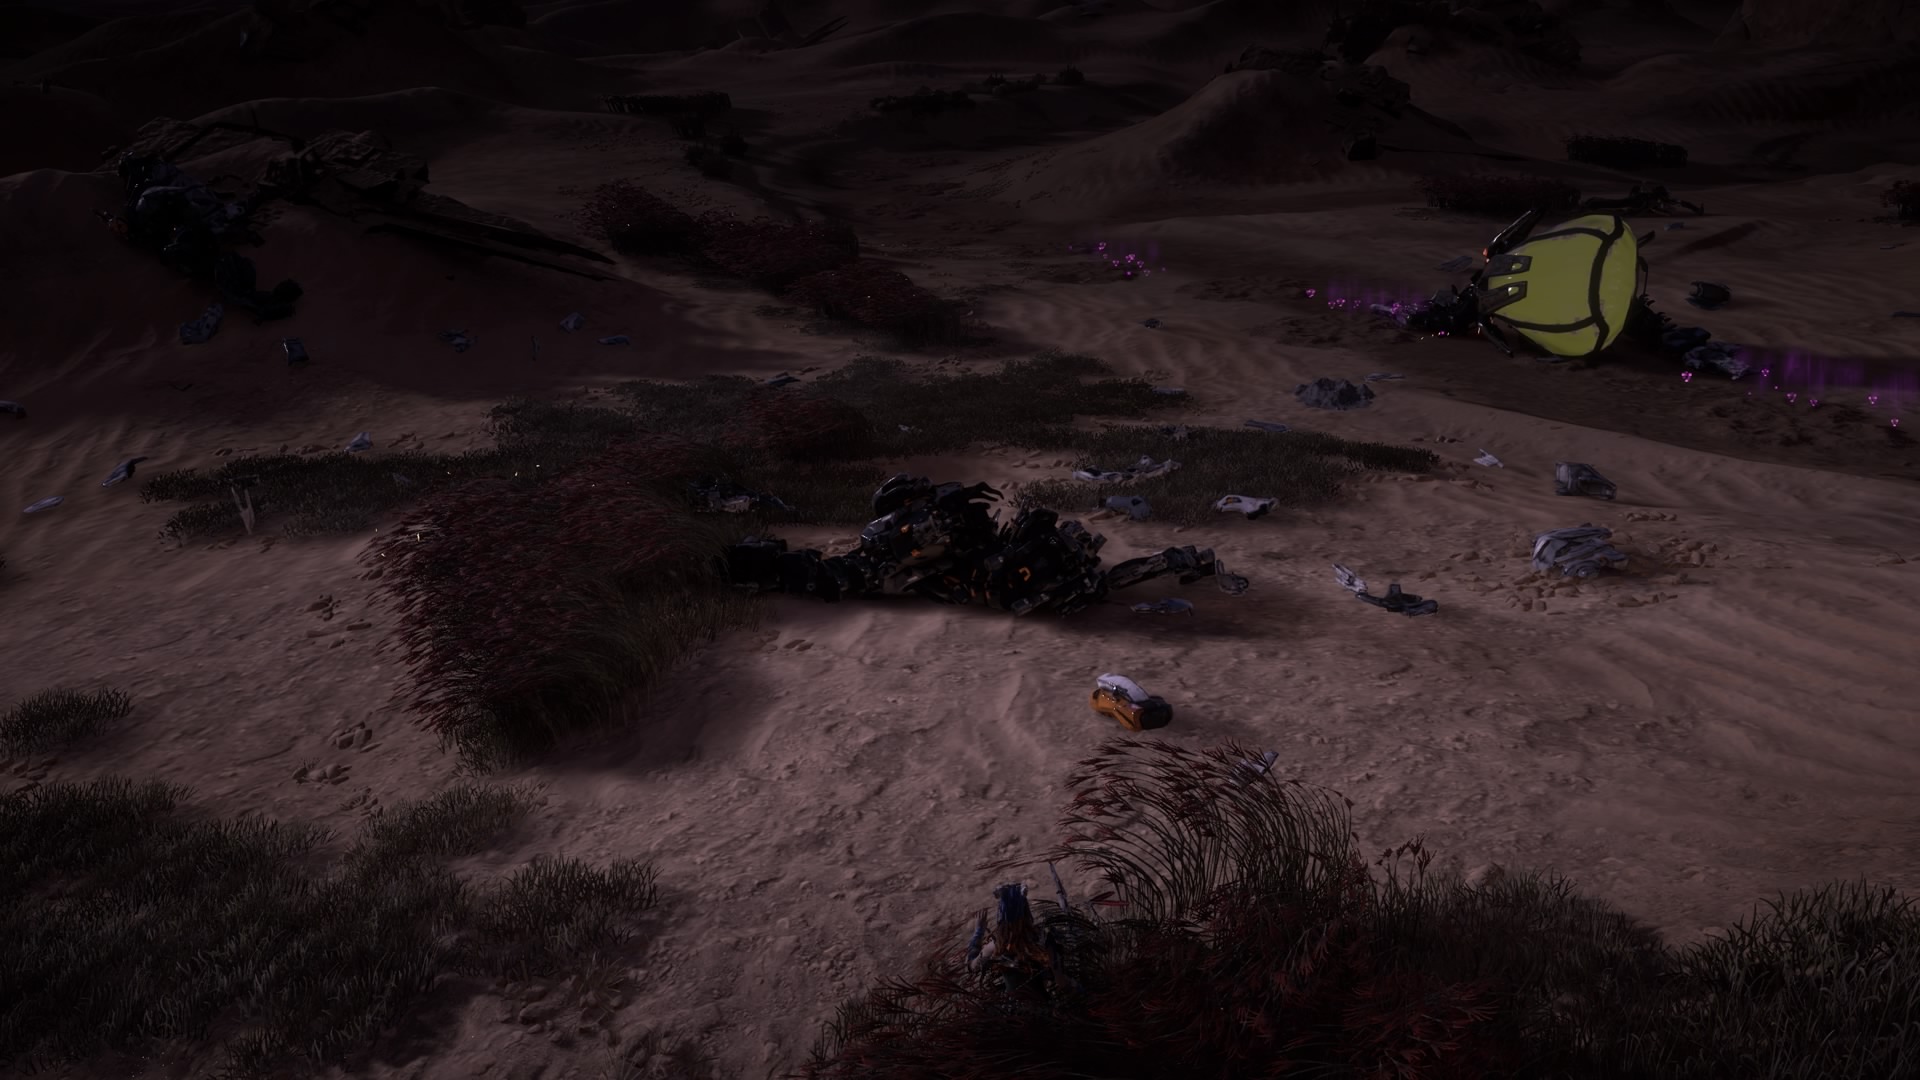 And this was not even half of the things needed to be killed at the same time just to clear the area to access a Tallneck. This was a very frustrating fight. Now if I only had the ability to take over some of the bigger monsters in the area at the time...